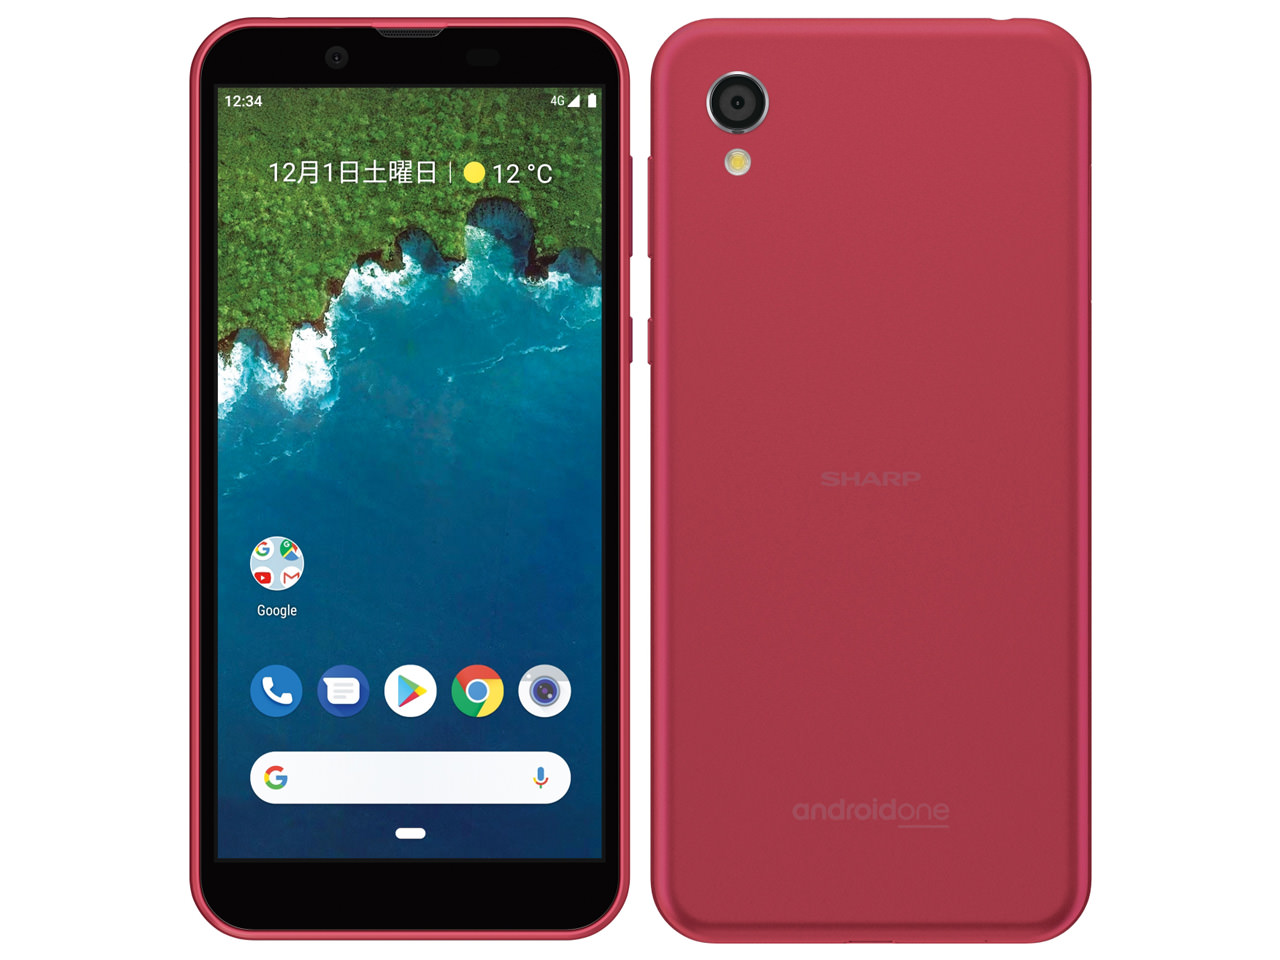 Android One S5 ワイモバイル [ローズピンク]